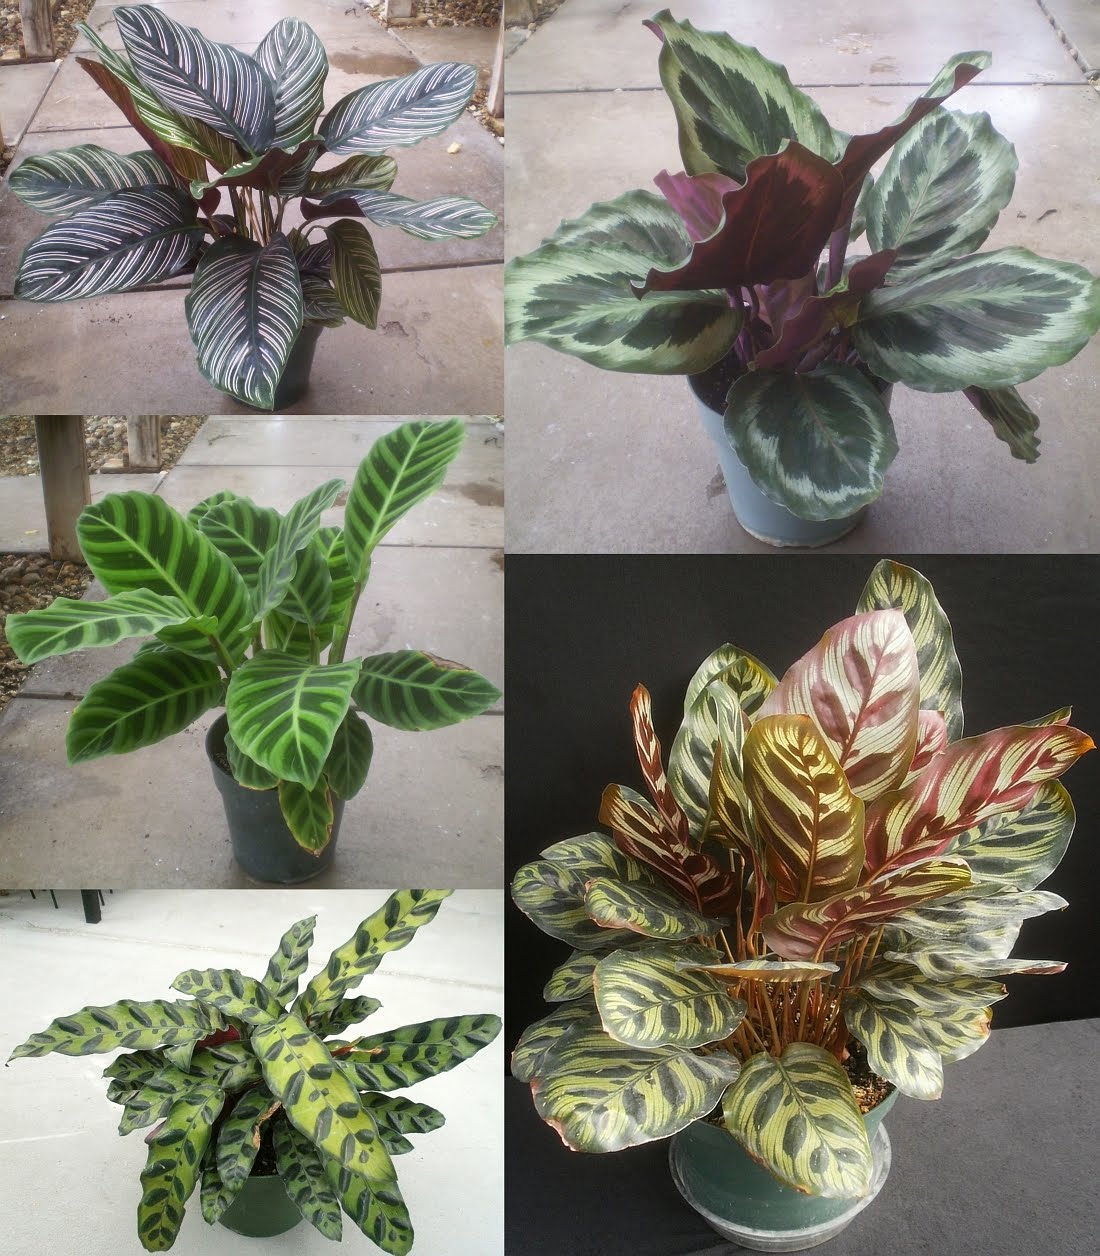 Plants are the Strangest People: 10/2/11 - 10/9/11